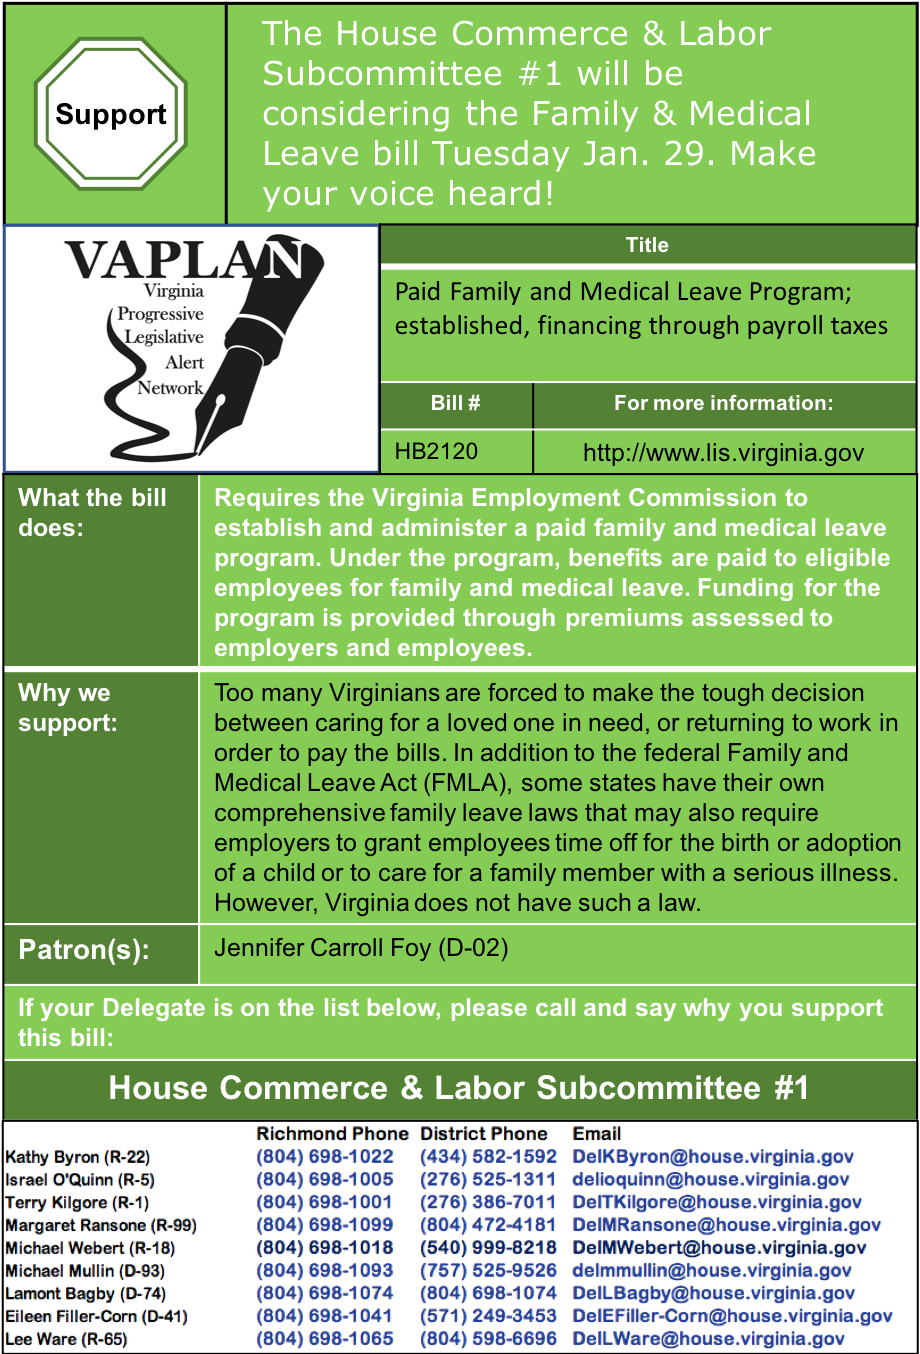 ALERT: House Commerce & Labor Subcommittee #1 considers Virginia Family Medical Leave program Tuesday Jan. 29.